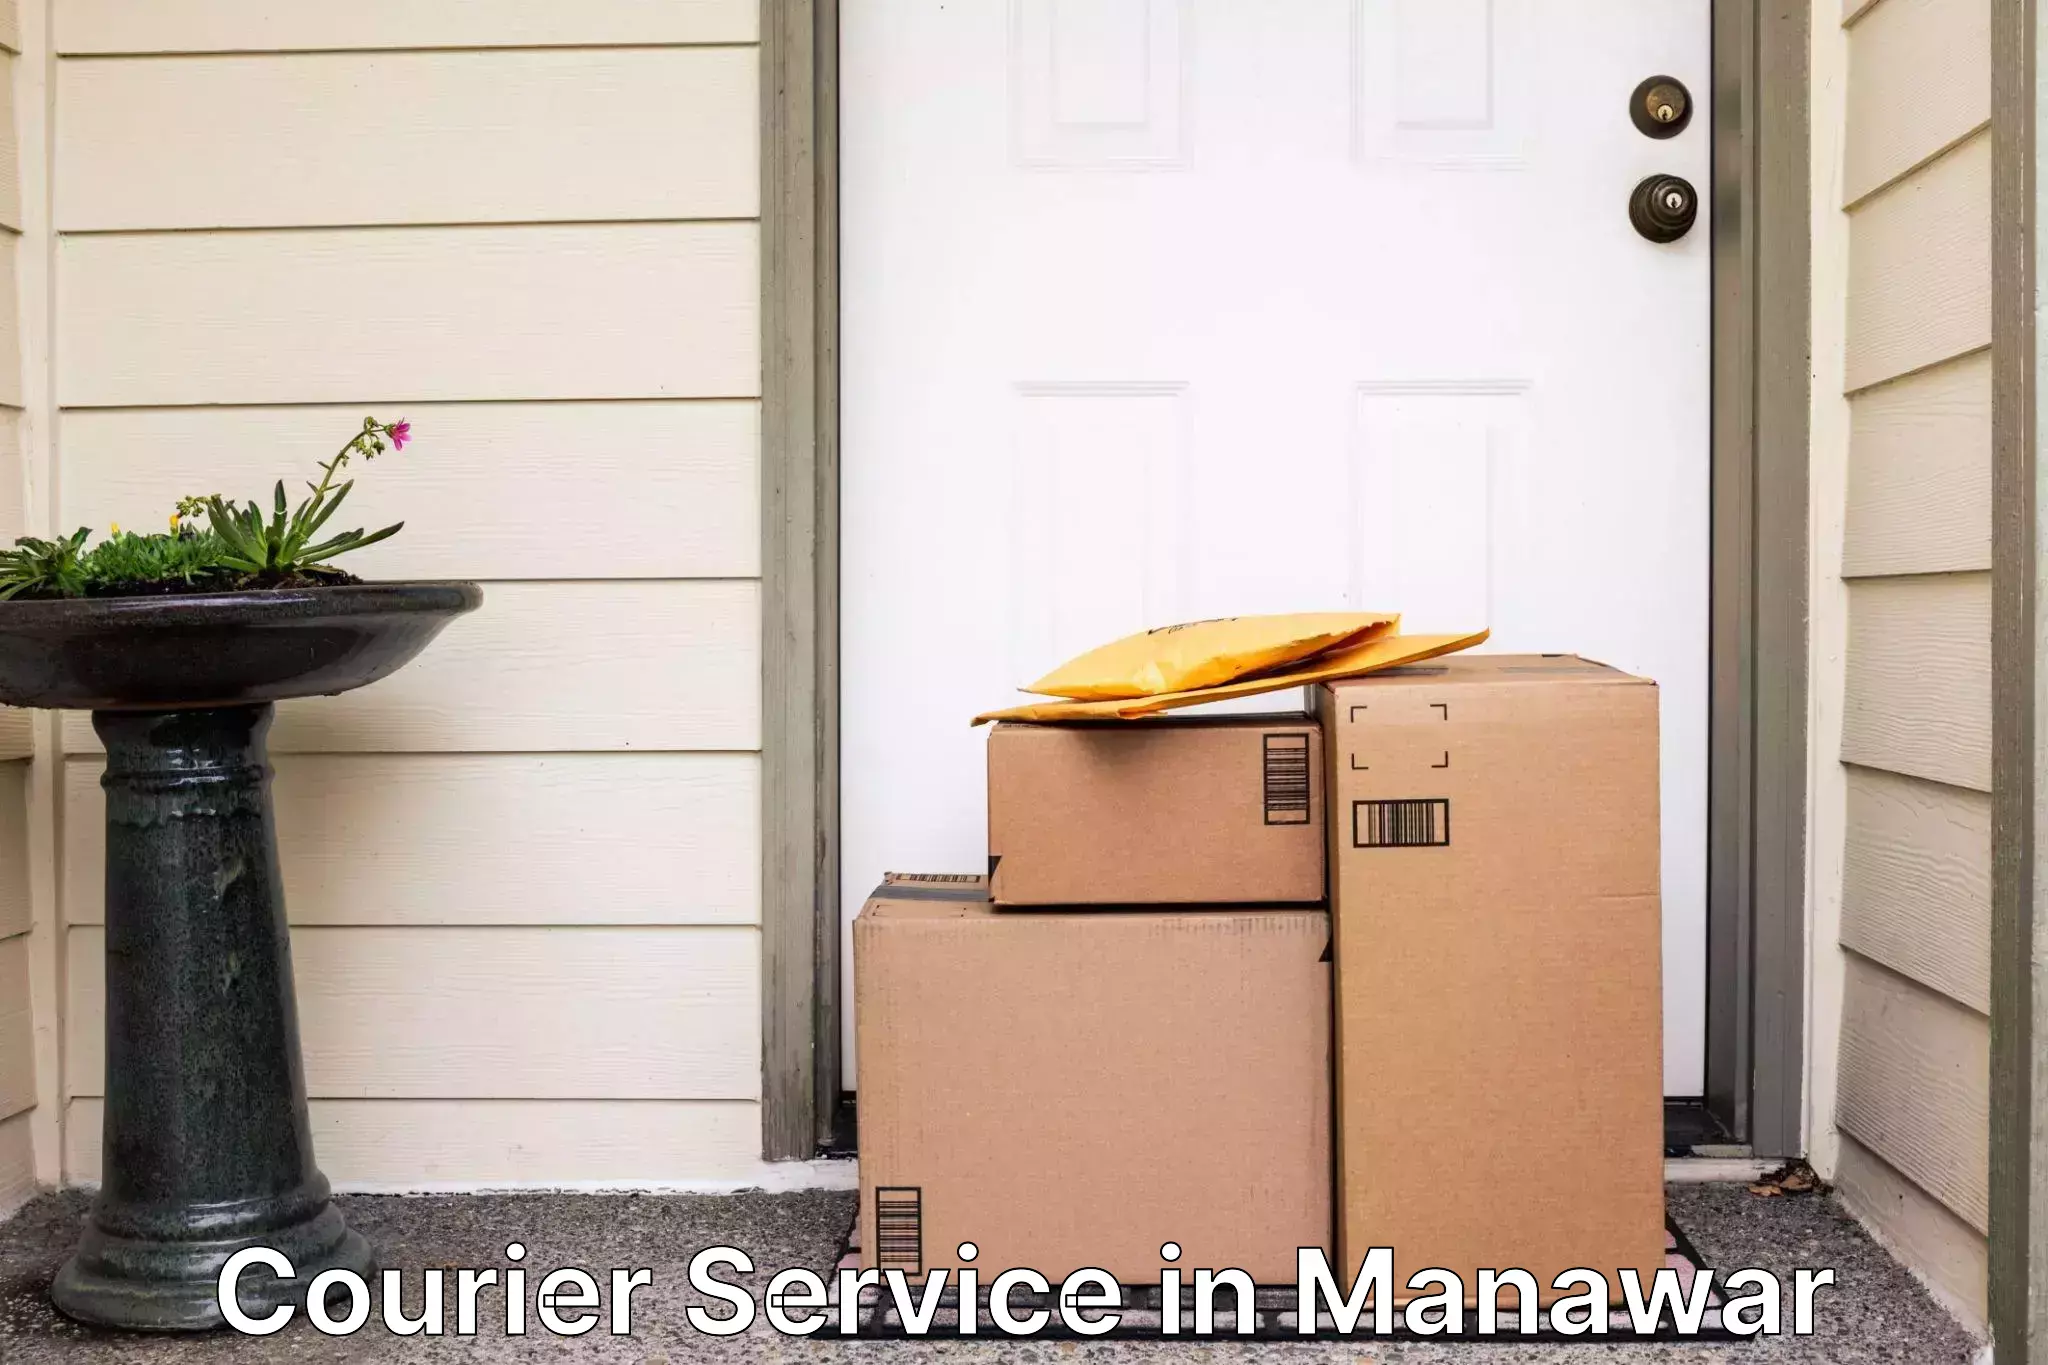 Package tracking in Manawar